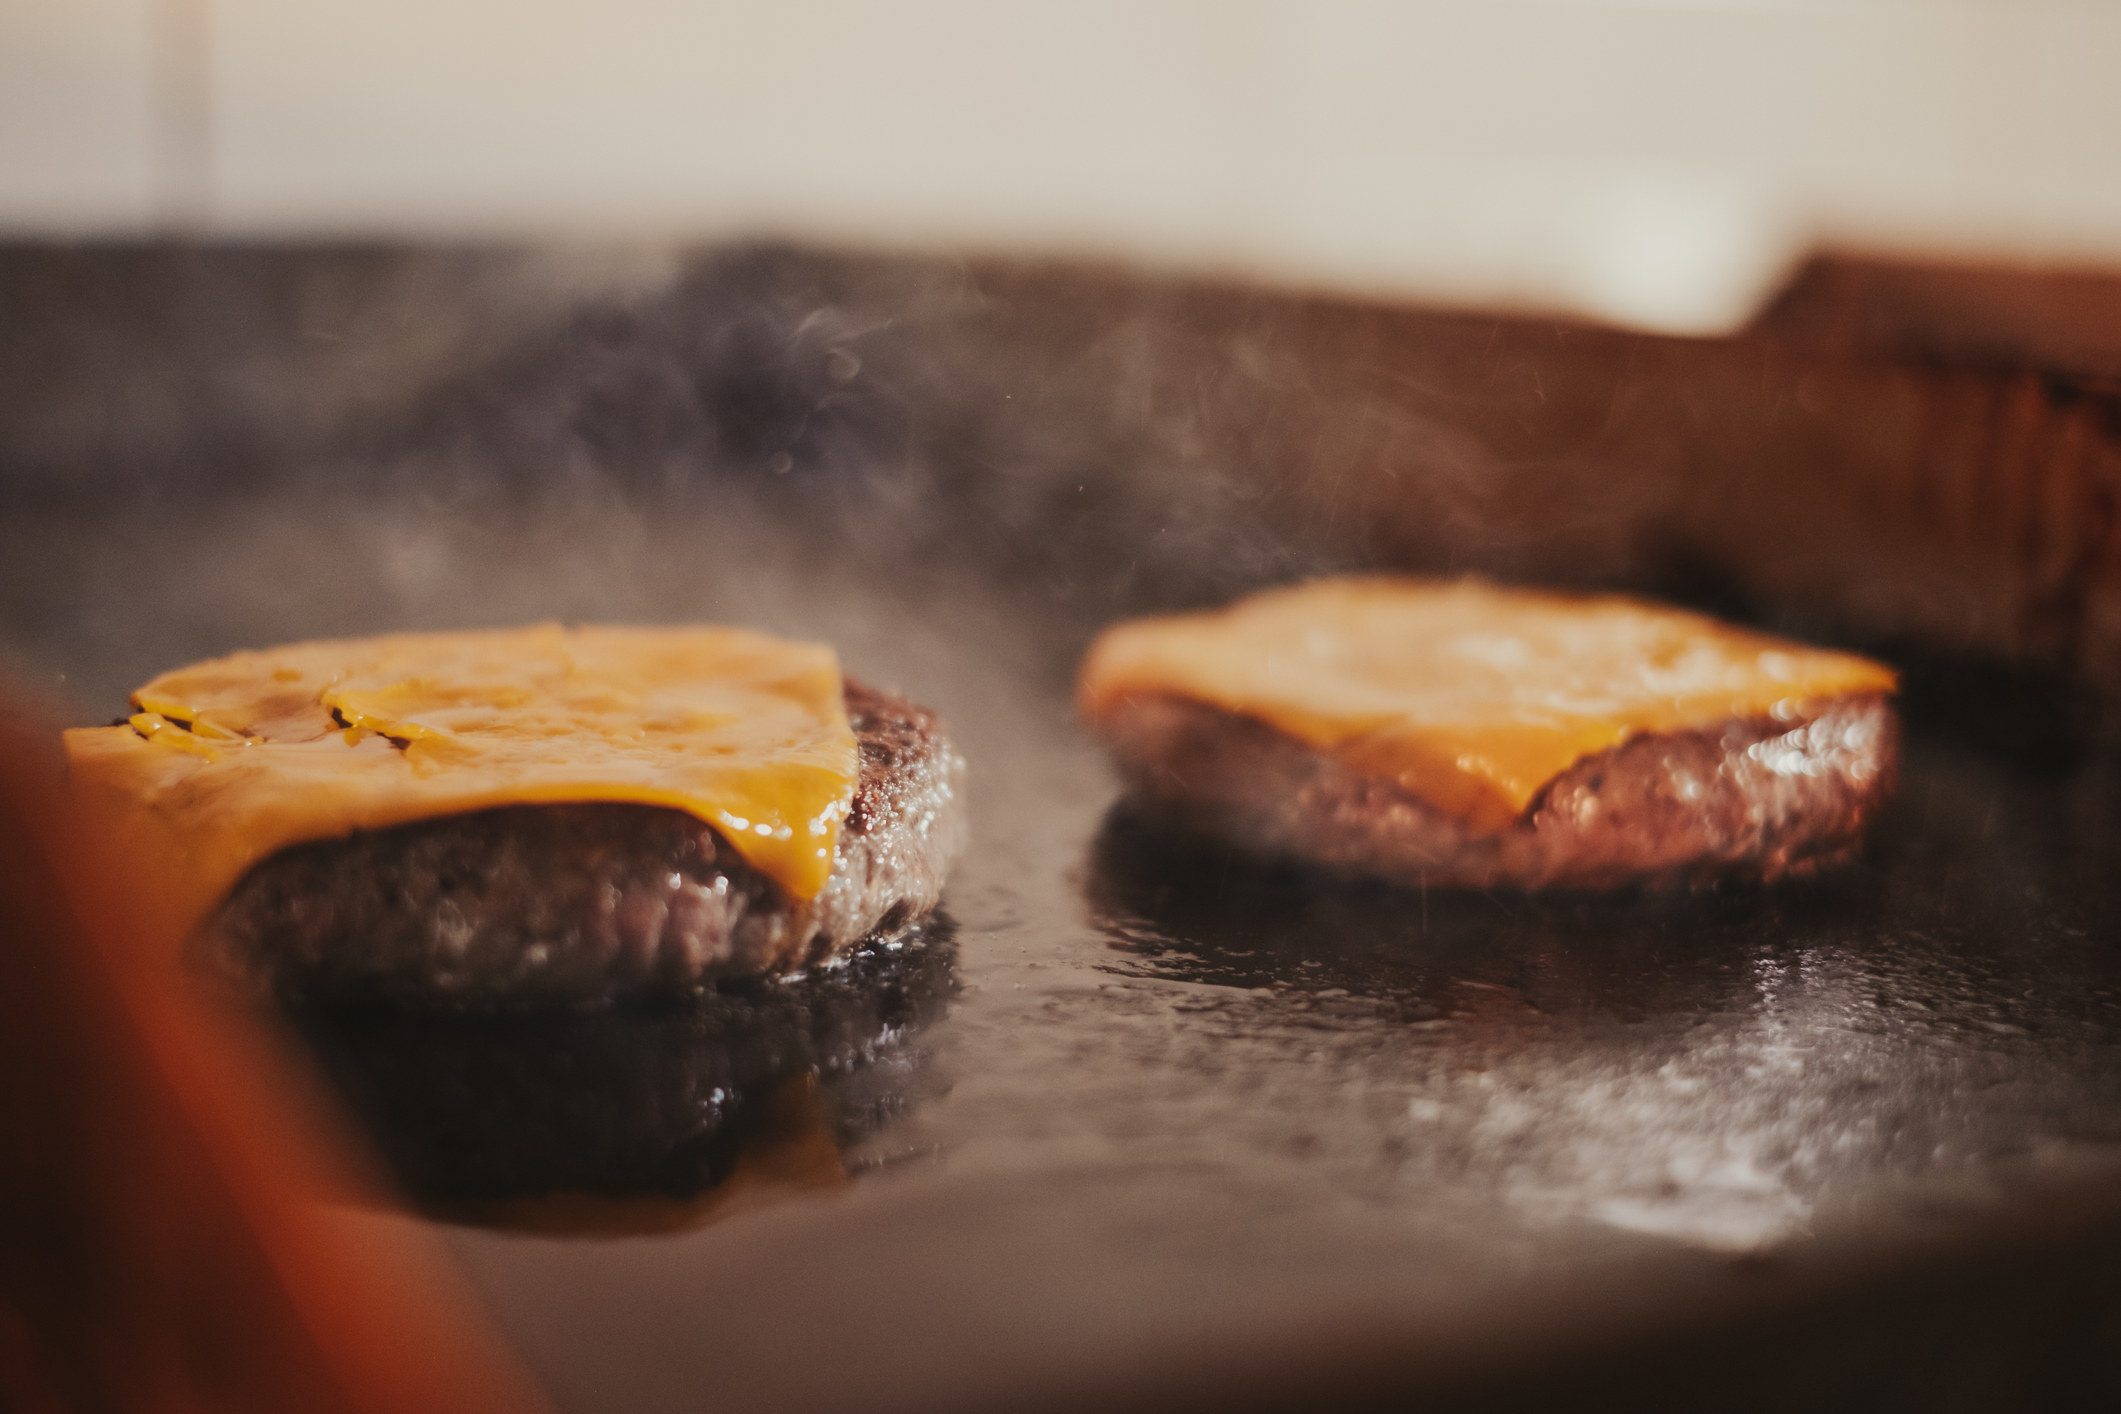 Two cheeseburgers frying on the grill.